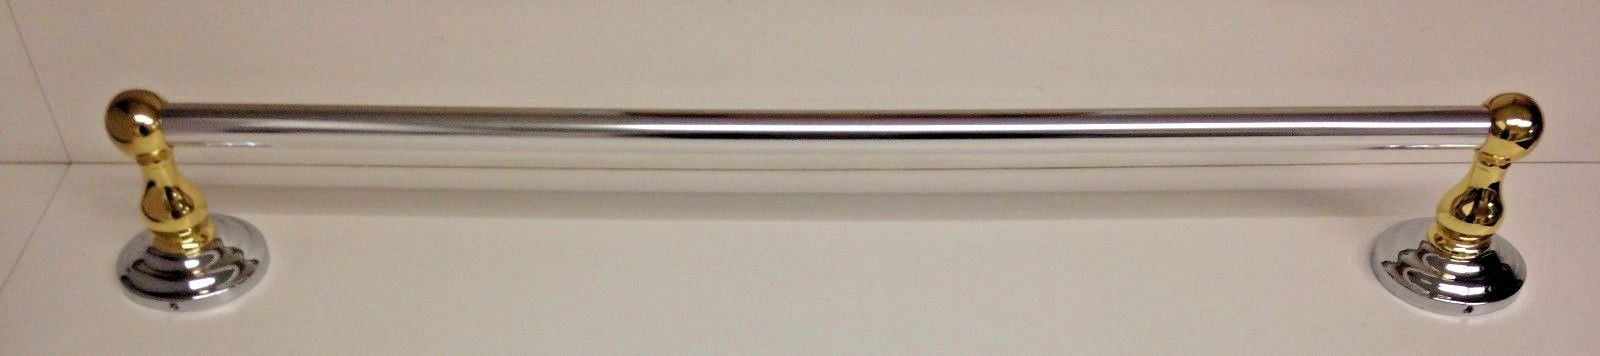 Taymor 04-CB6224 Brentwood 24" x 3/4" Towel Bar (Polished Chrome & Brass Color)